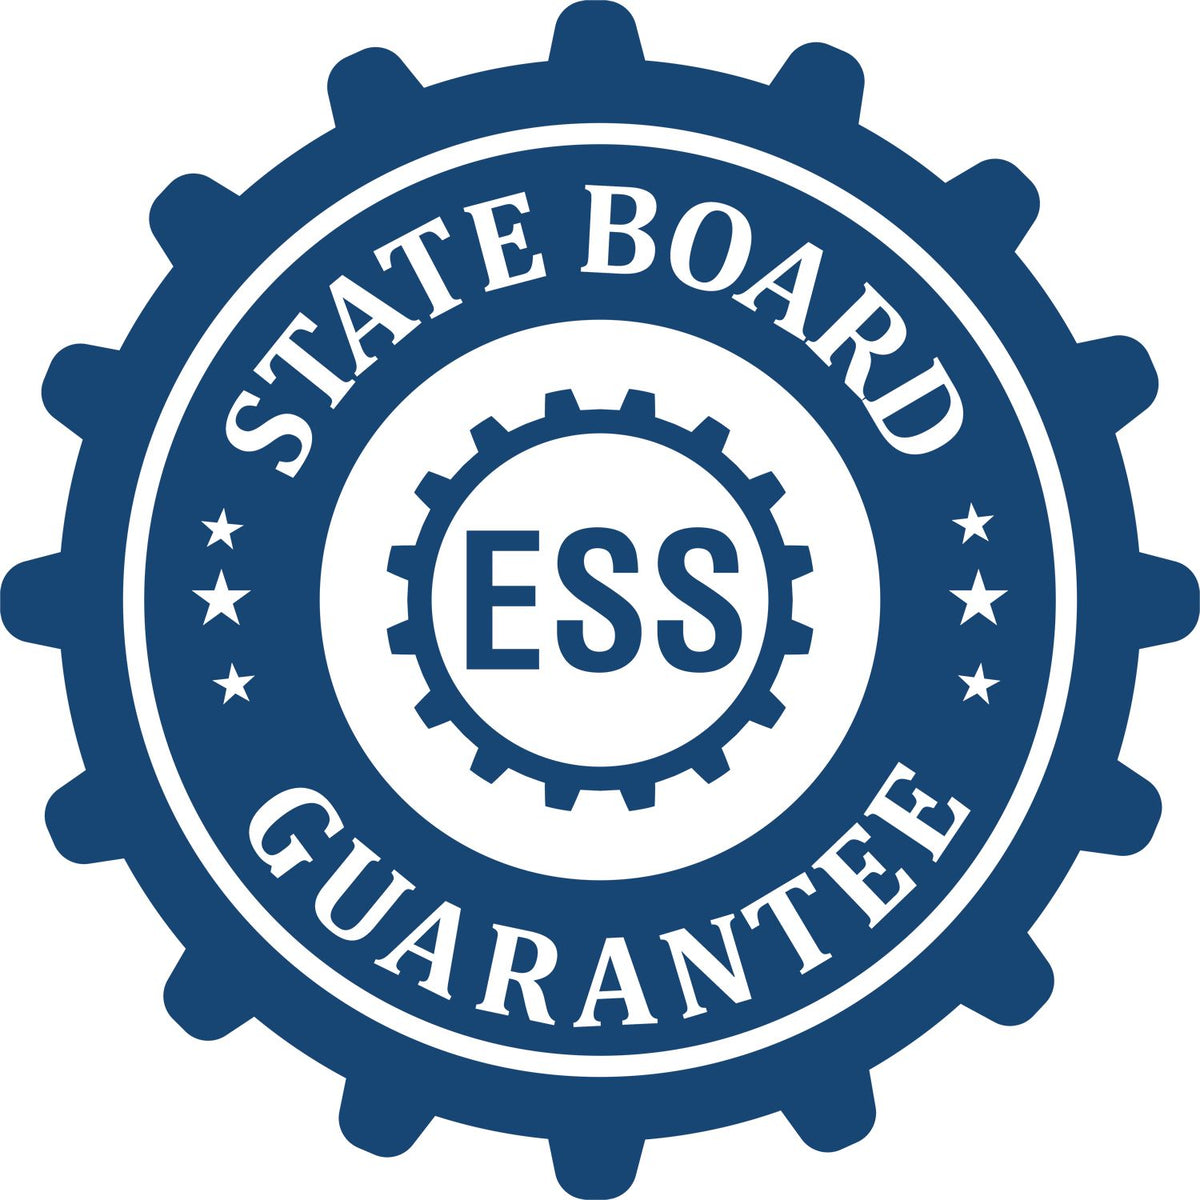 An emblem in a gear shape illustrating a state board guarantee for the Hybrid Missouri Landscape Architect Seal